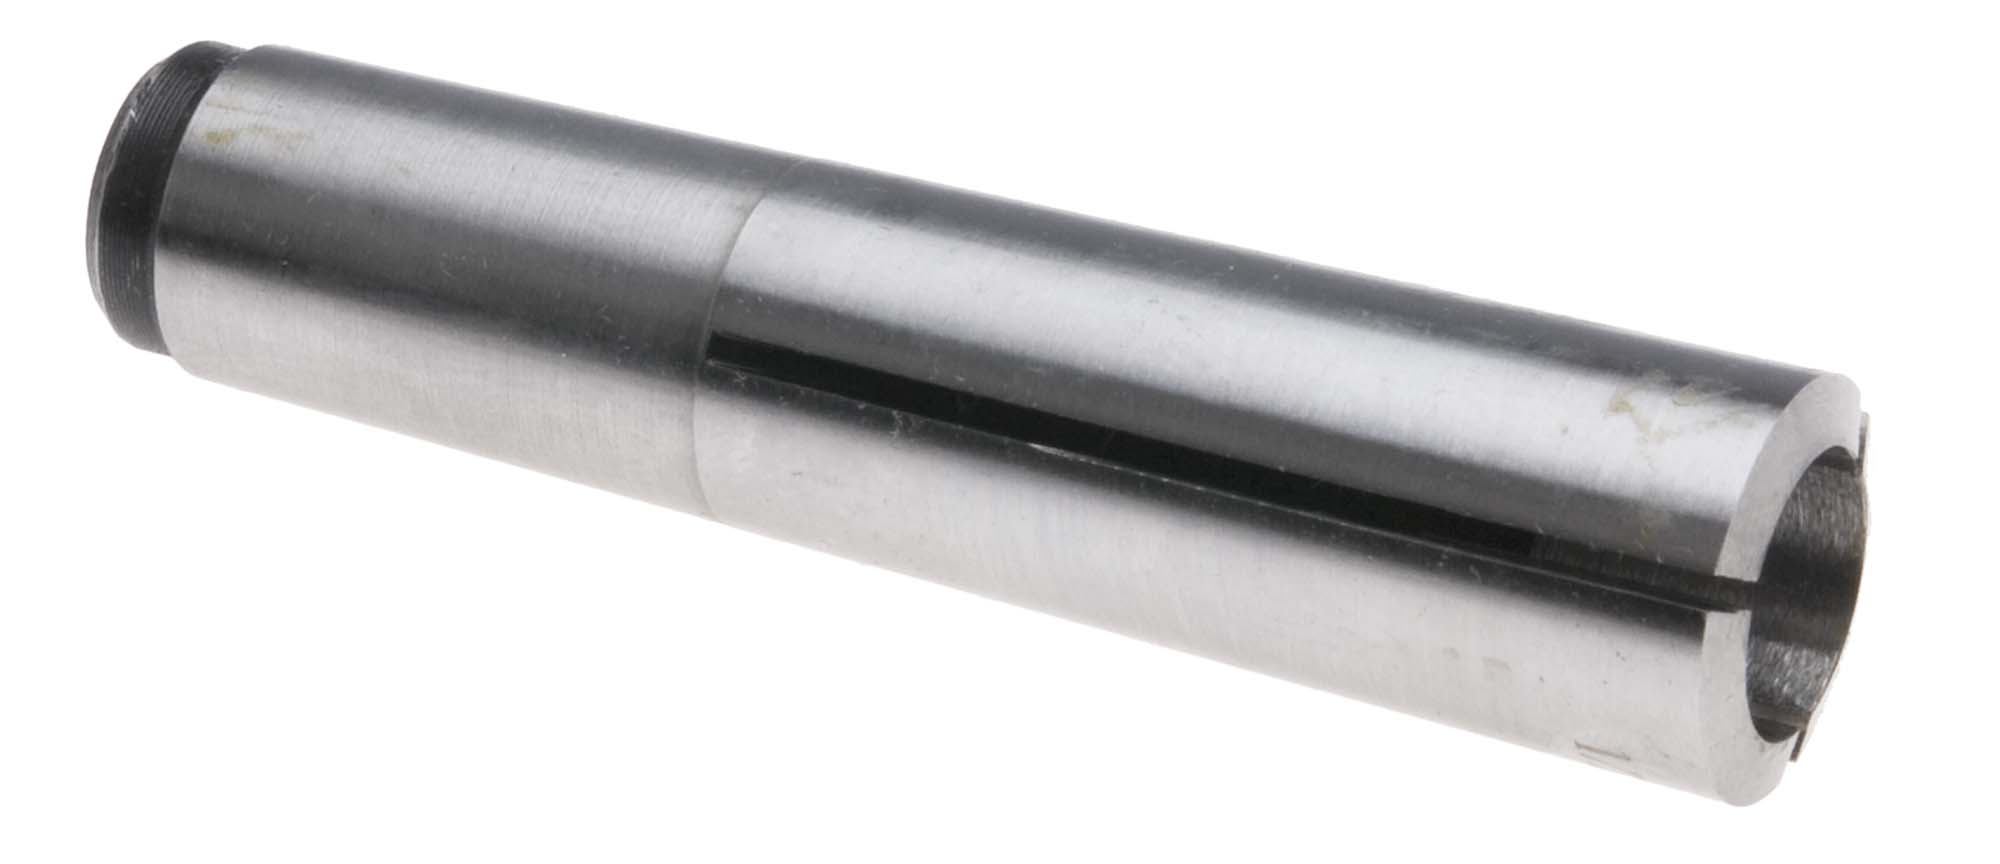 3/16" 7 B and S Taper Collet